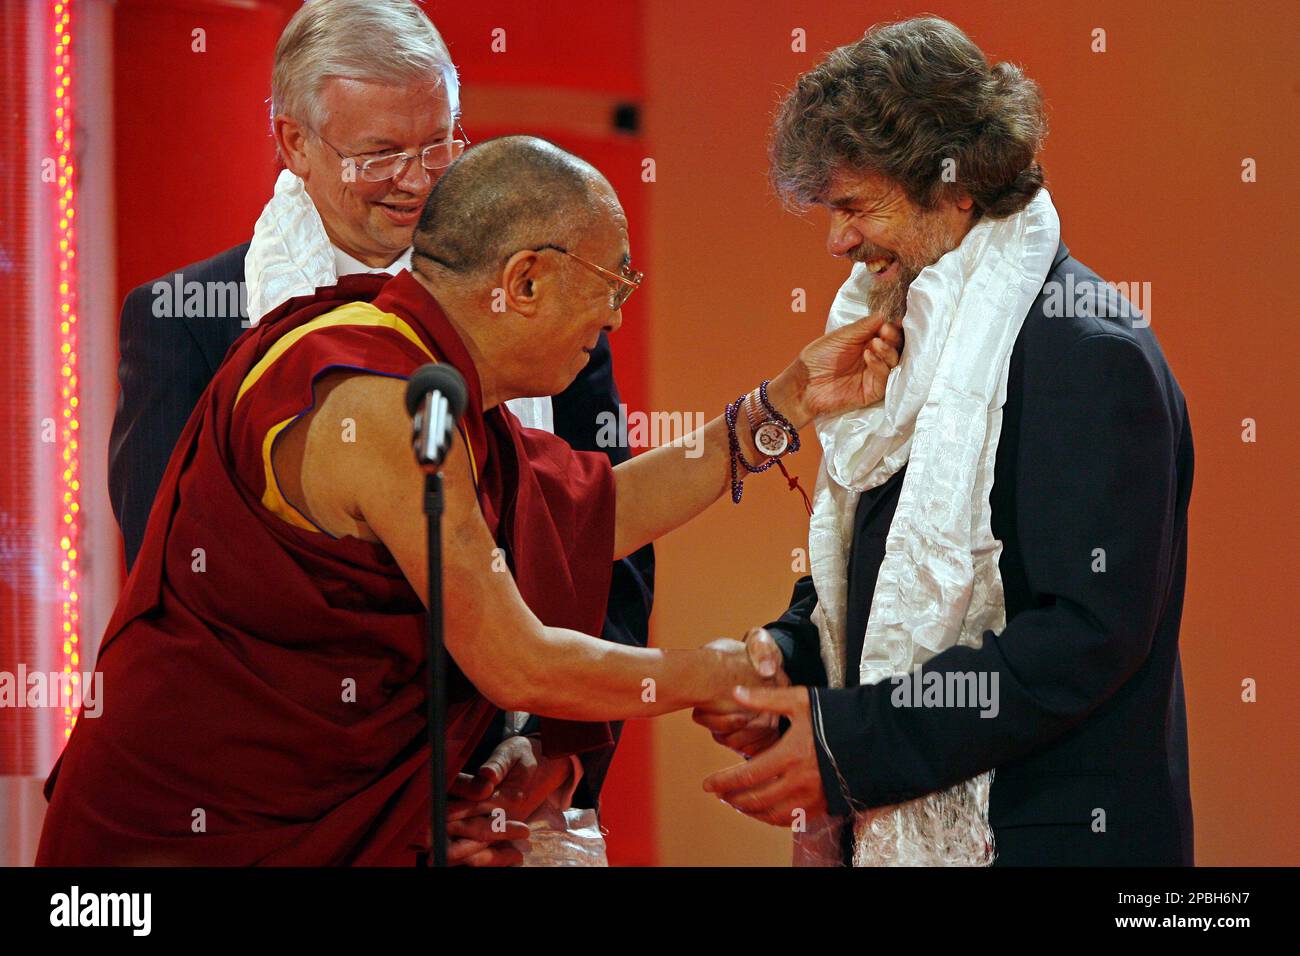 The Dalai Lama touches the beard of mountain climber Reinhold Messner,  right, at the reception of the 'Osgar' Media award in Leipzig, Germany,  Saturday, May 12, 2007. He was awarded for his